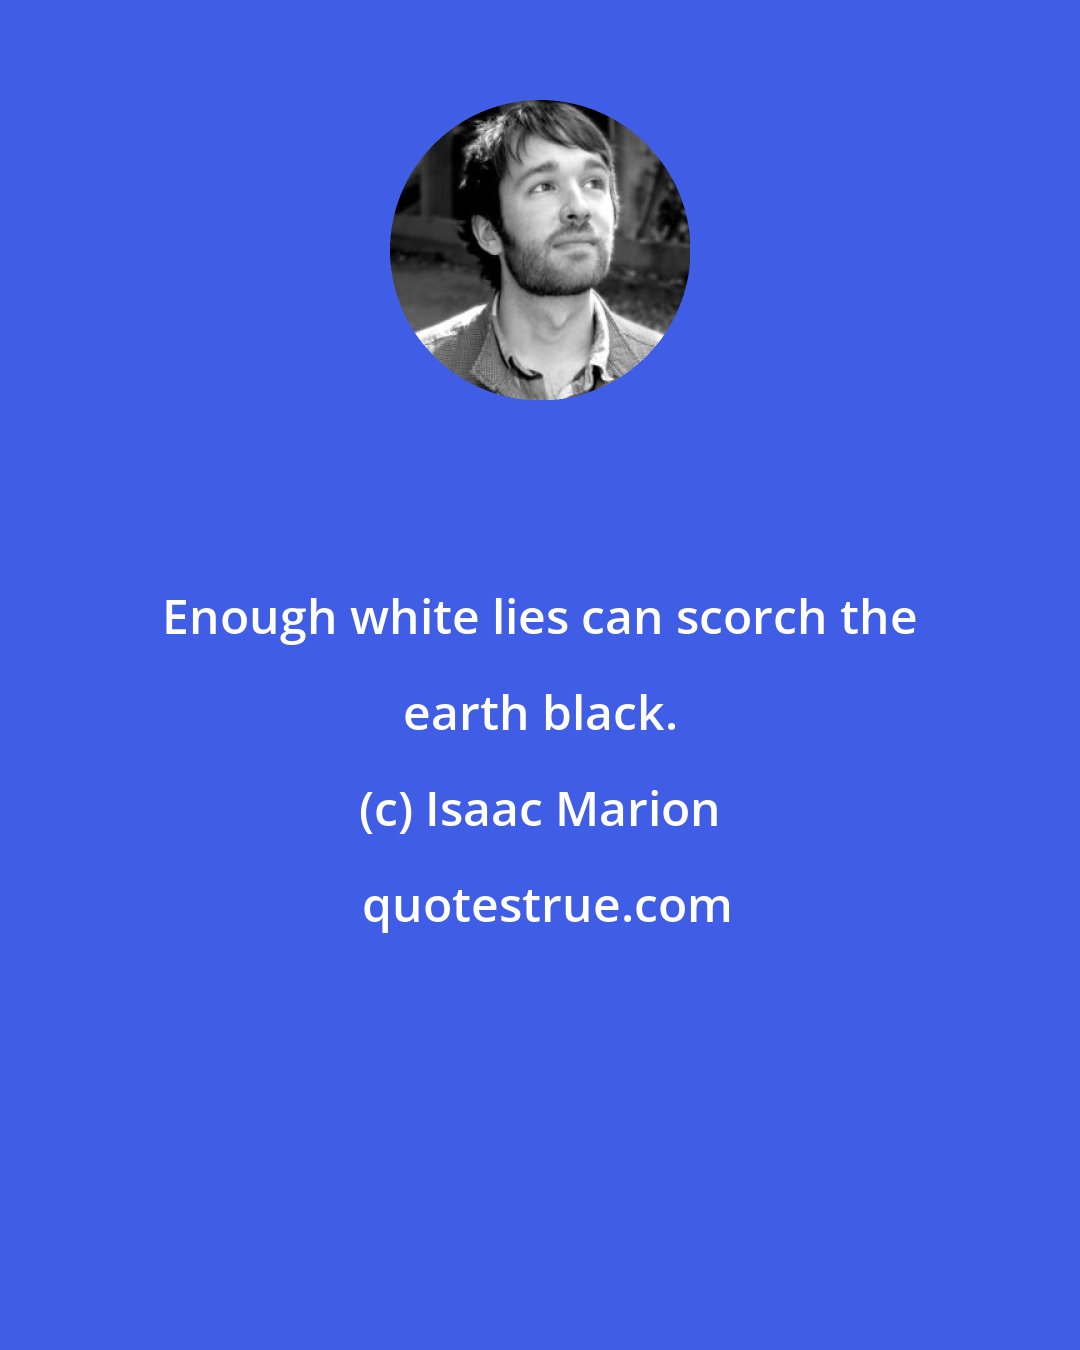 Isaac Marion: Enough white lies can scorch the earth black.